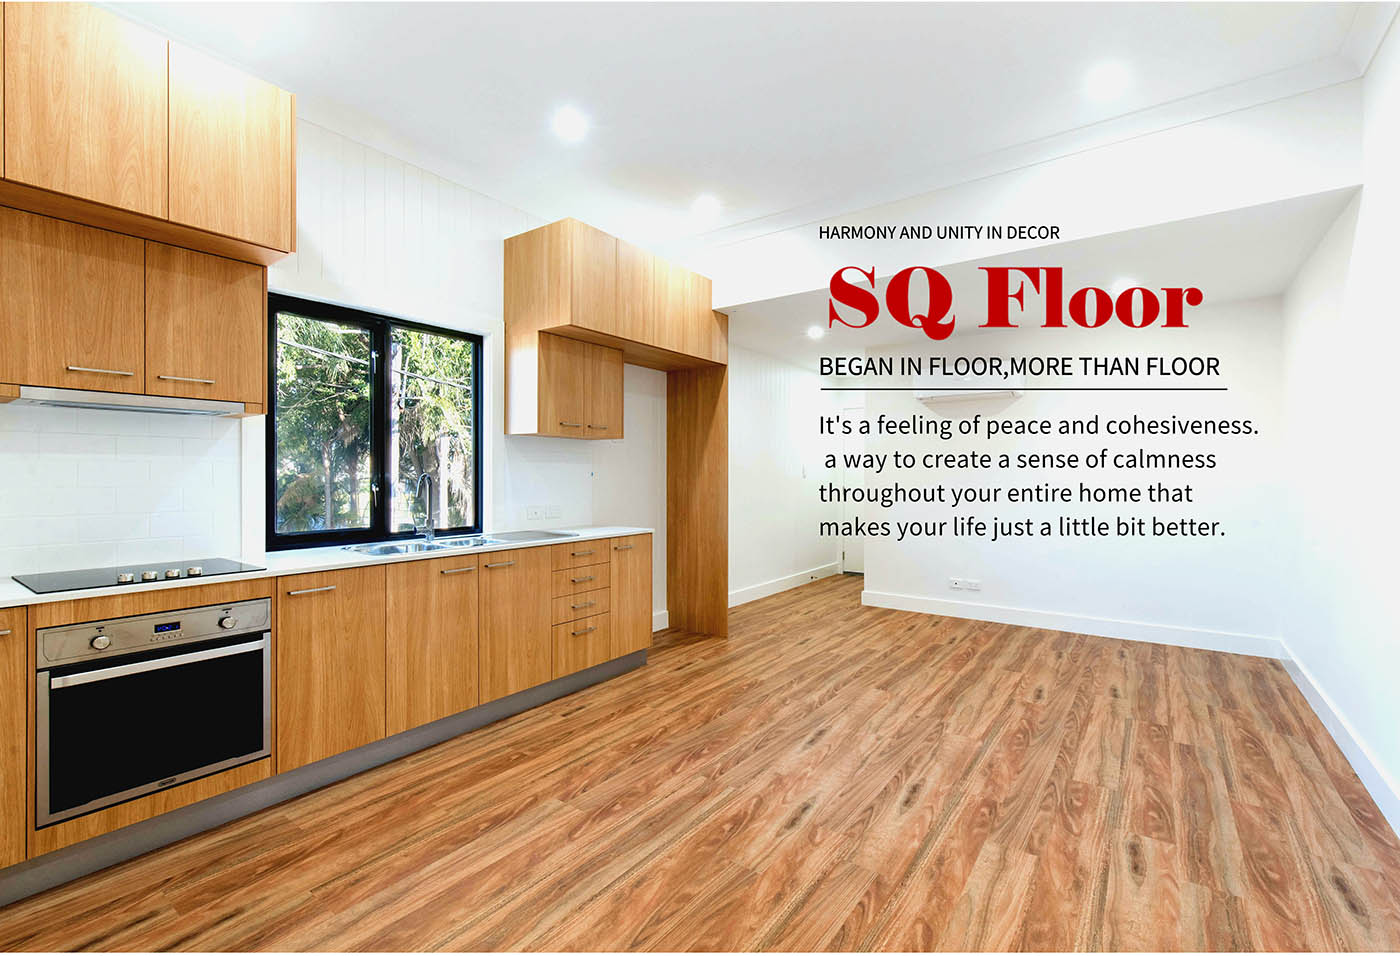 sq floor creates peace cohesiveness and calmness throughout your home and makes your life a little bit better